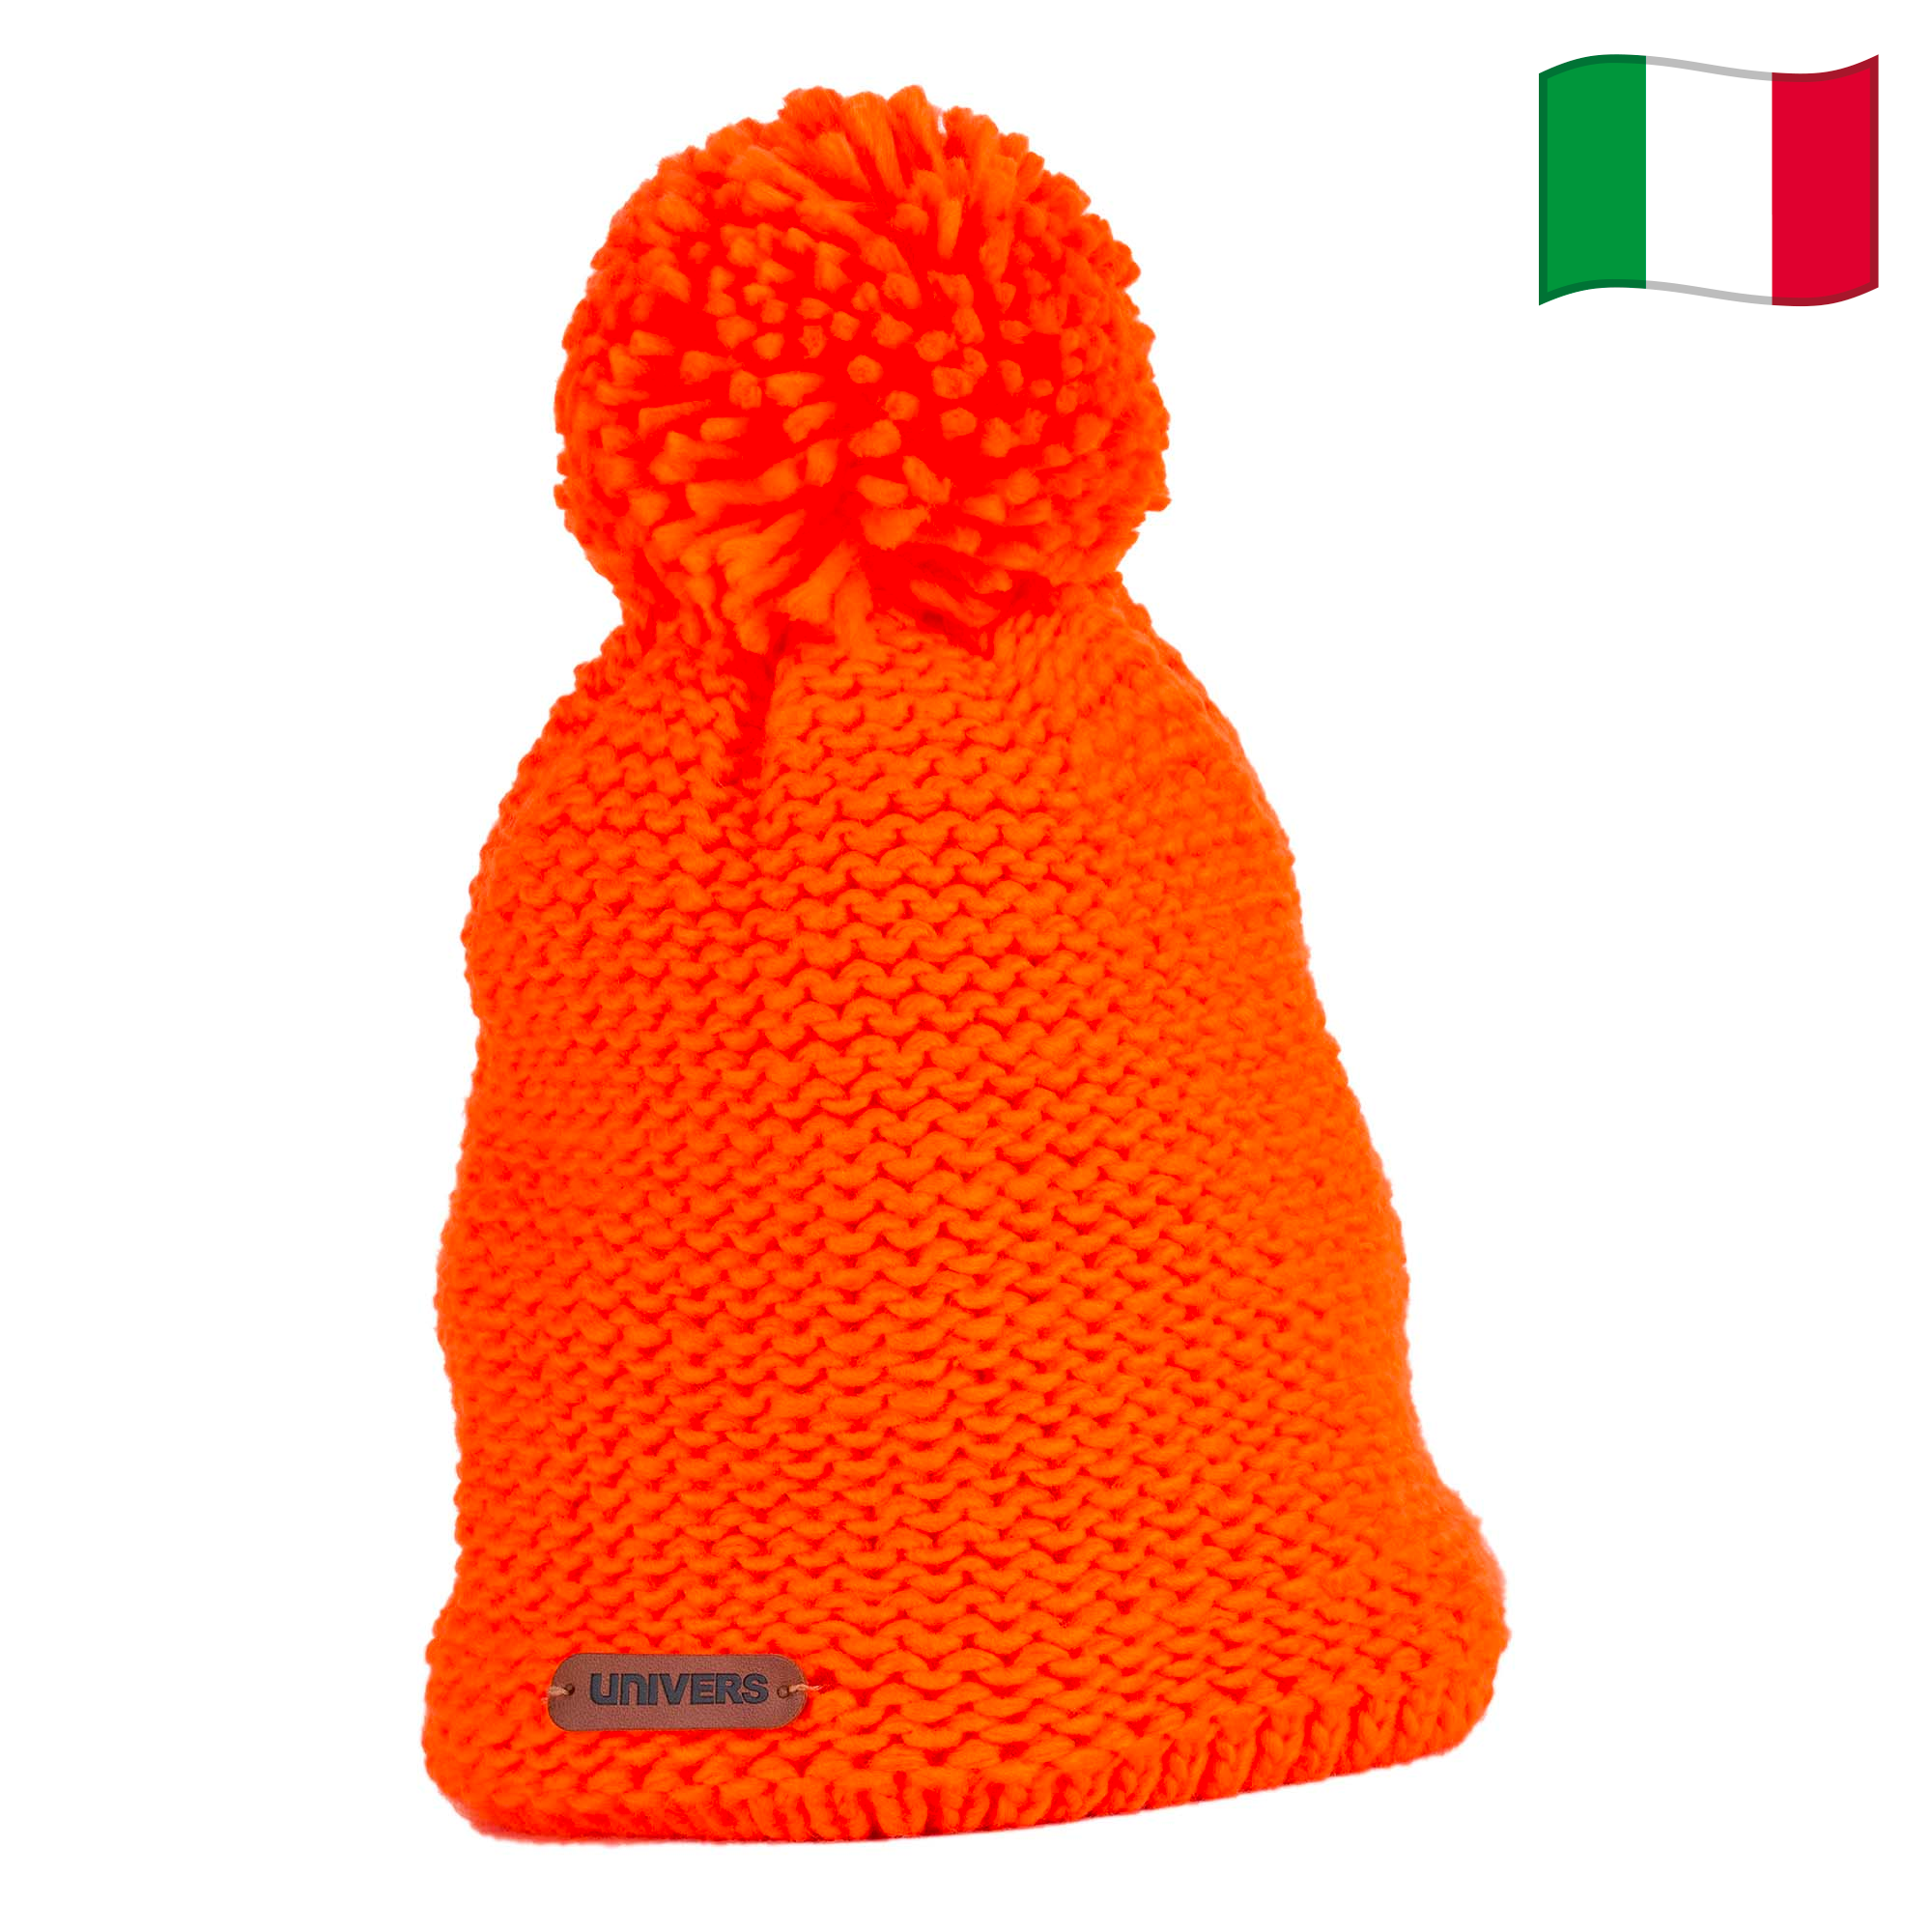 Univers Alpi Men's Knitted Beanie/Toque with Faux Fur Pom (Safety Orange)